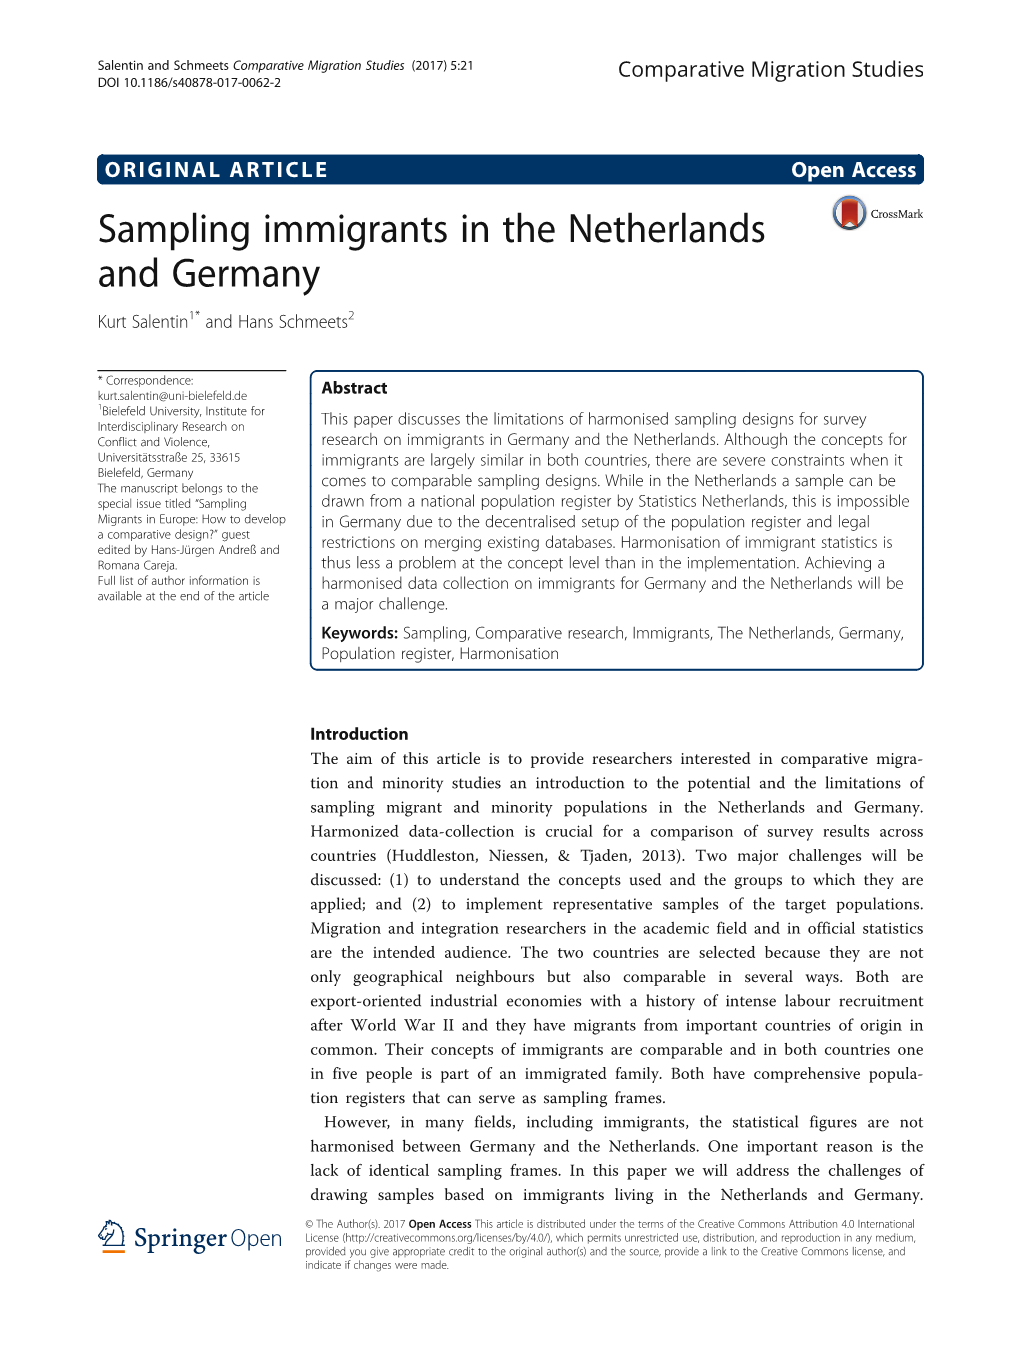 Sampling Immigrants in the Netherlands and Germany Kurt Salentin1* and Hans Schmeets2